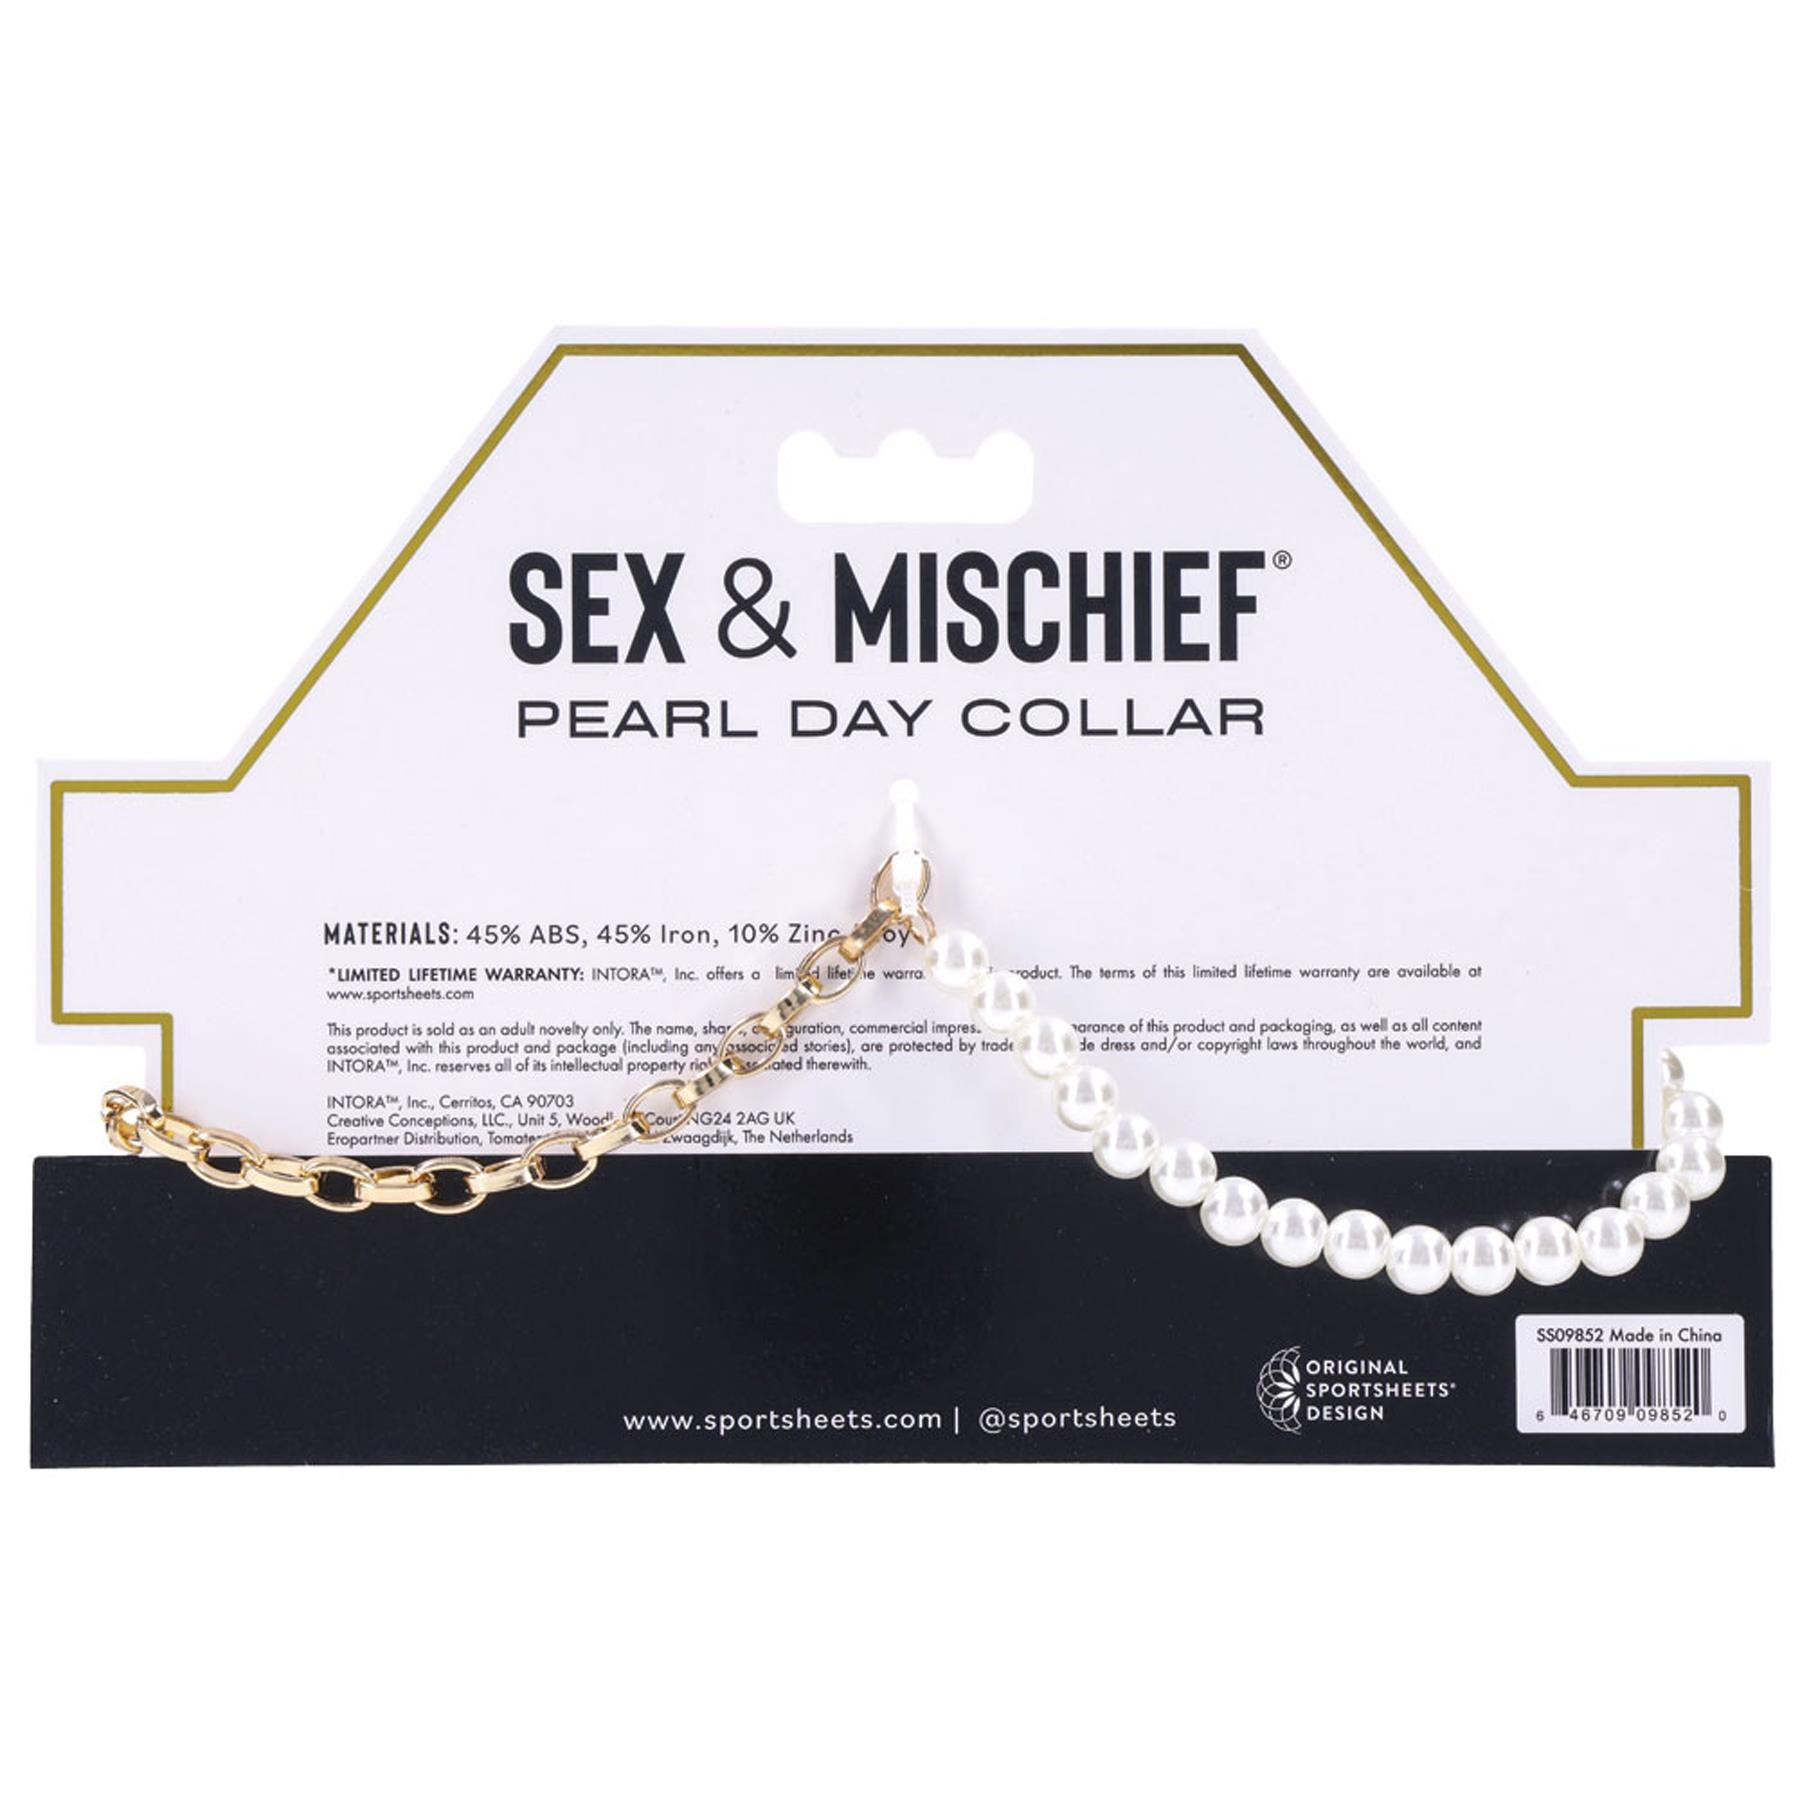 Sex & Mischief Pearl Day Collar - Packaging Shot - Back